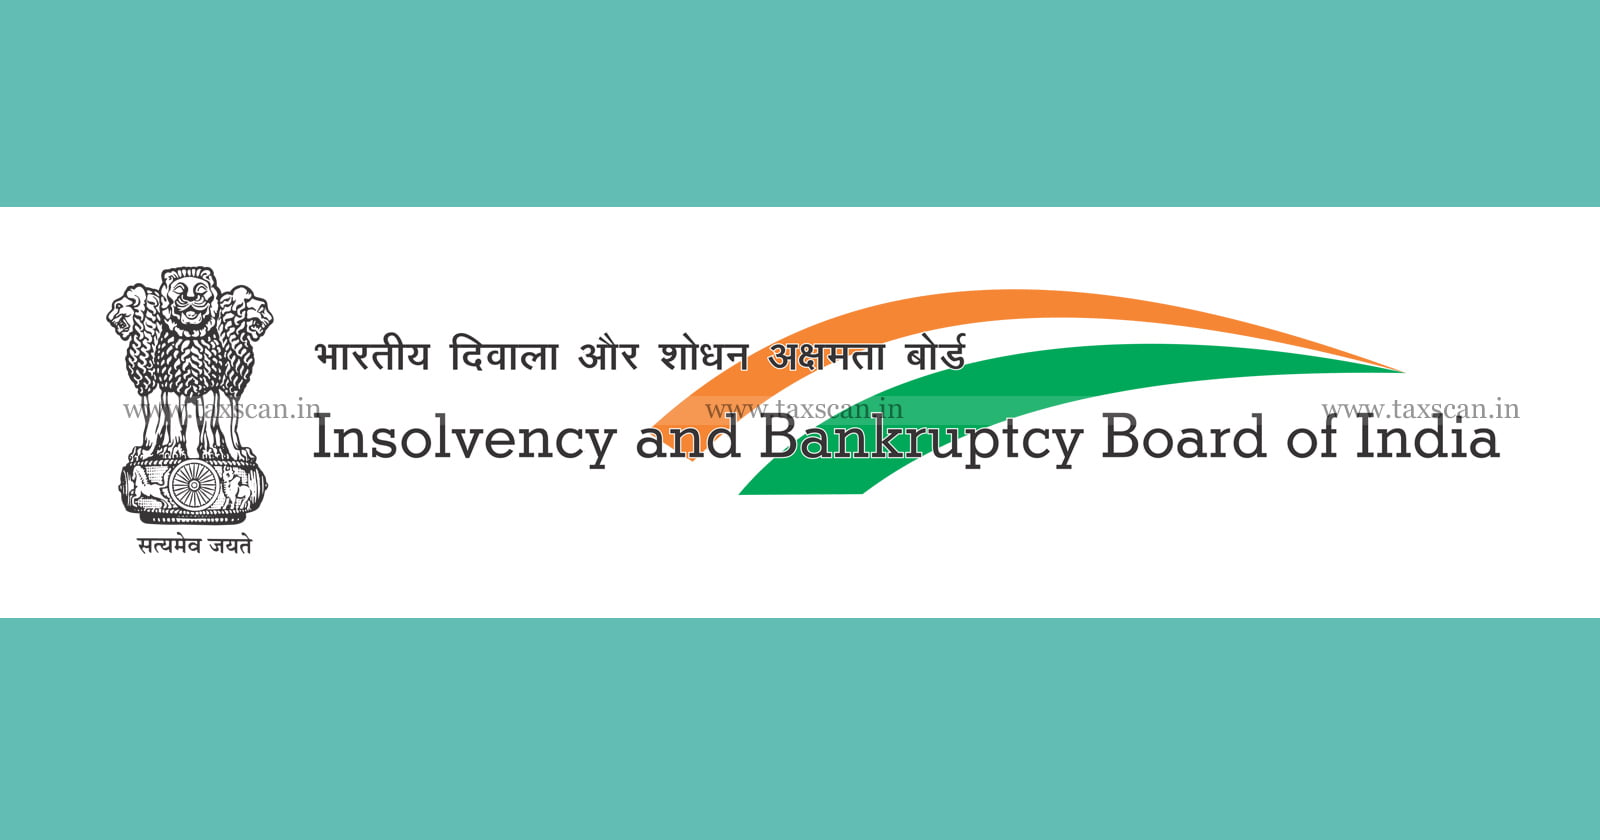 IBBI - Insolvency and Bankruptcy Board of India - IBBI New Regulations Real Estate - IRP RP Bank Account Mandate - Taxscan